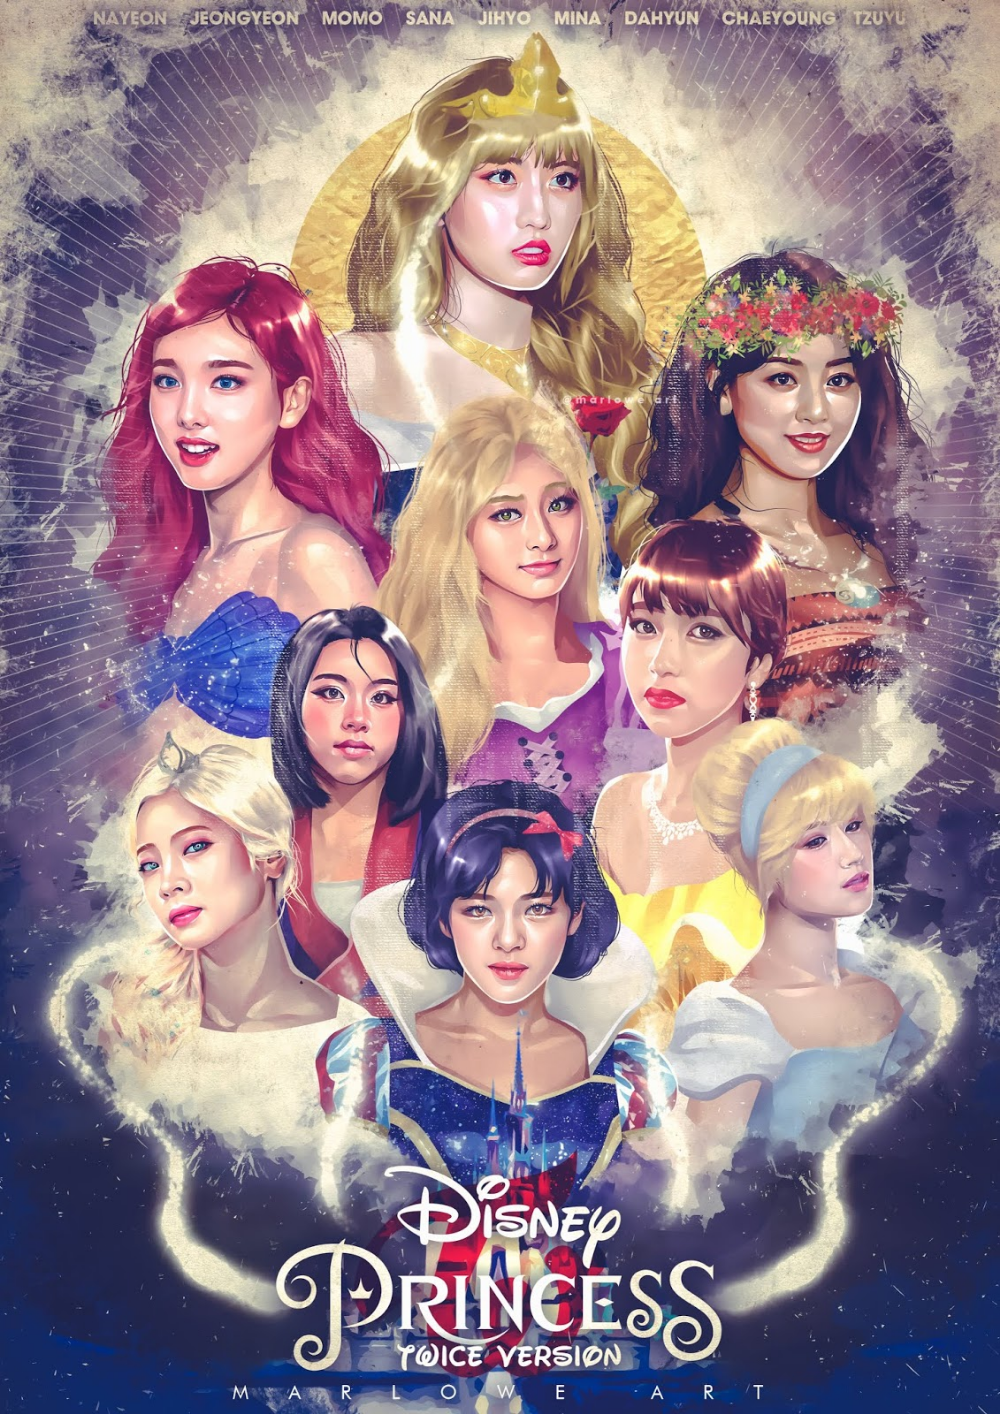 Twice Feel Special Wallpapers